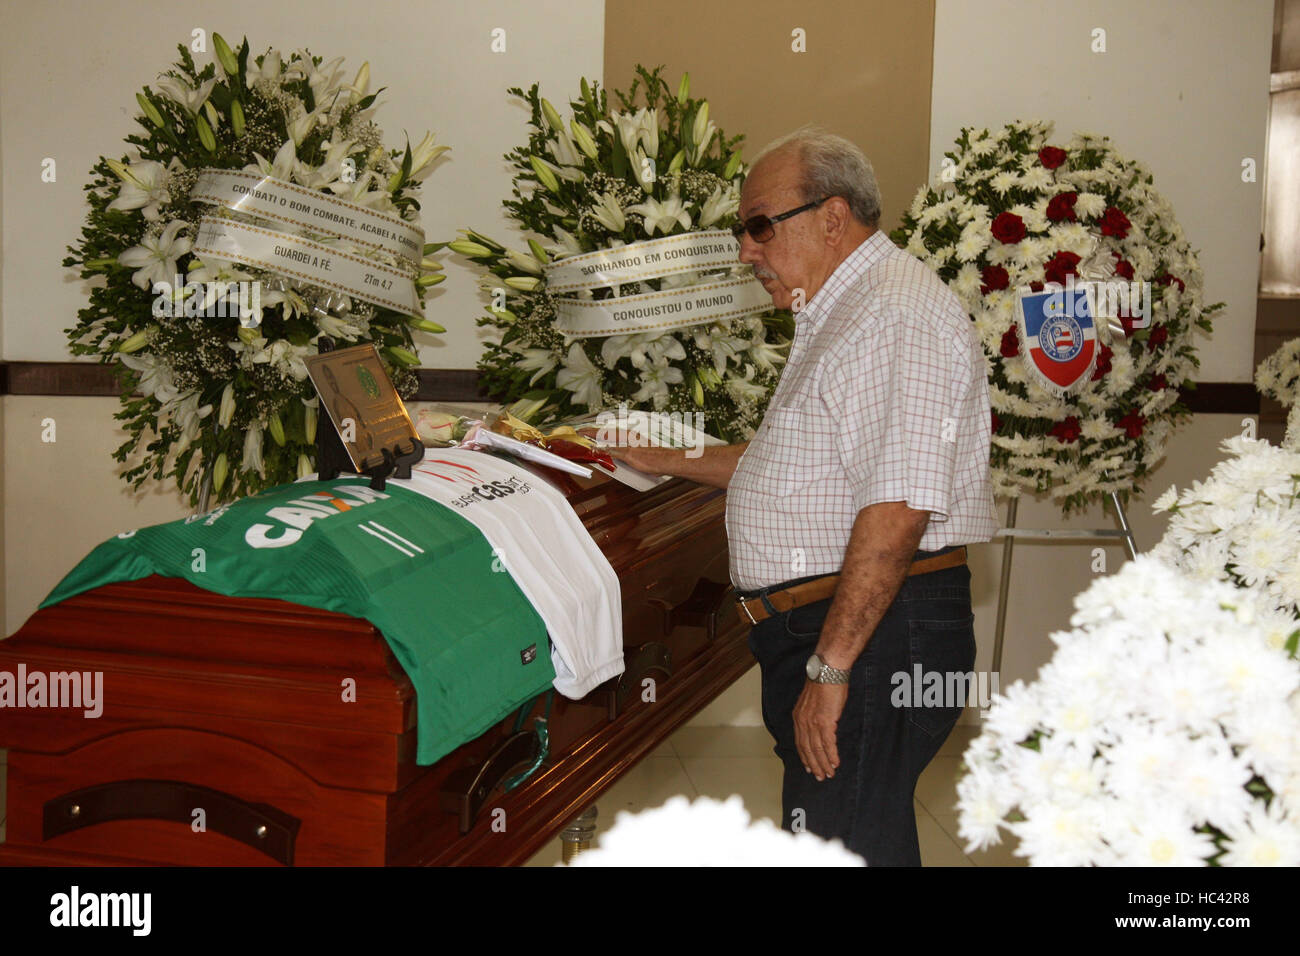 SALVADOR, BA - 04.12.2016: VELORIO DE ANANIAS JOGADOR CHAPECO - Eloi Castro Monteiro Ananias, player Chapecoense and killed in the plane crash. Veiled in the cemetery Garden Saldades in Salvador, where he received tributes from friends and family, fans, former players and directors of Bahia, which he joined at 14 years of age on the basis of division. He died at 27 and leaves the widow, Barbara Monteiro, and 5 year old son. Born in Sao Luis do Maranhao, and based in Salvador, where he married, had family and professional football career. His body will be cremated this Monday, 05/12/2016 at Cre Stock Photo